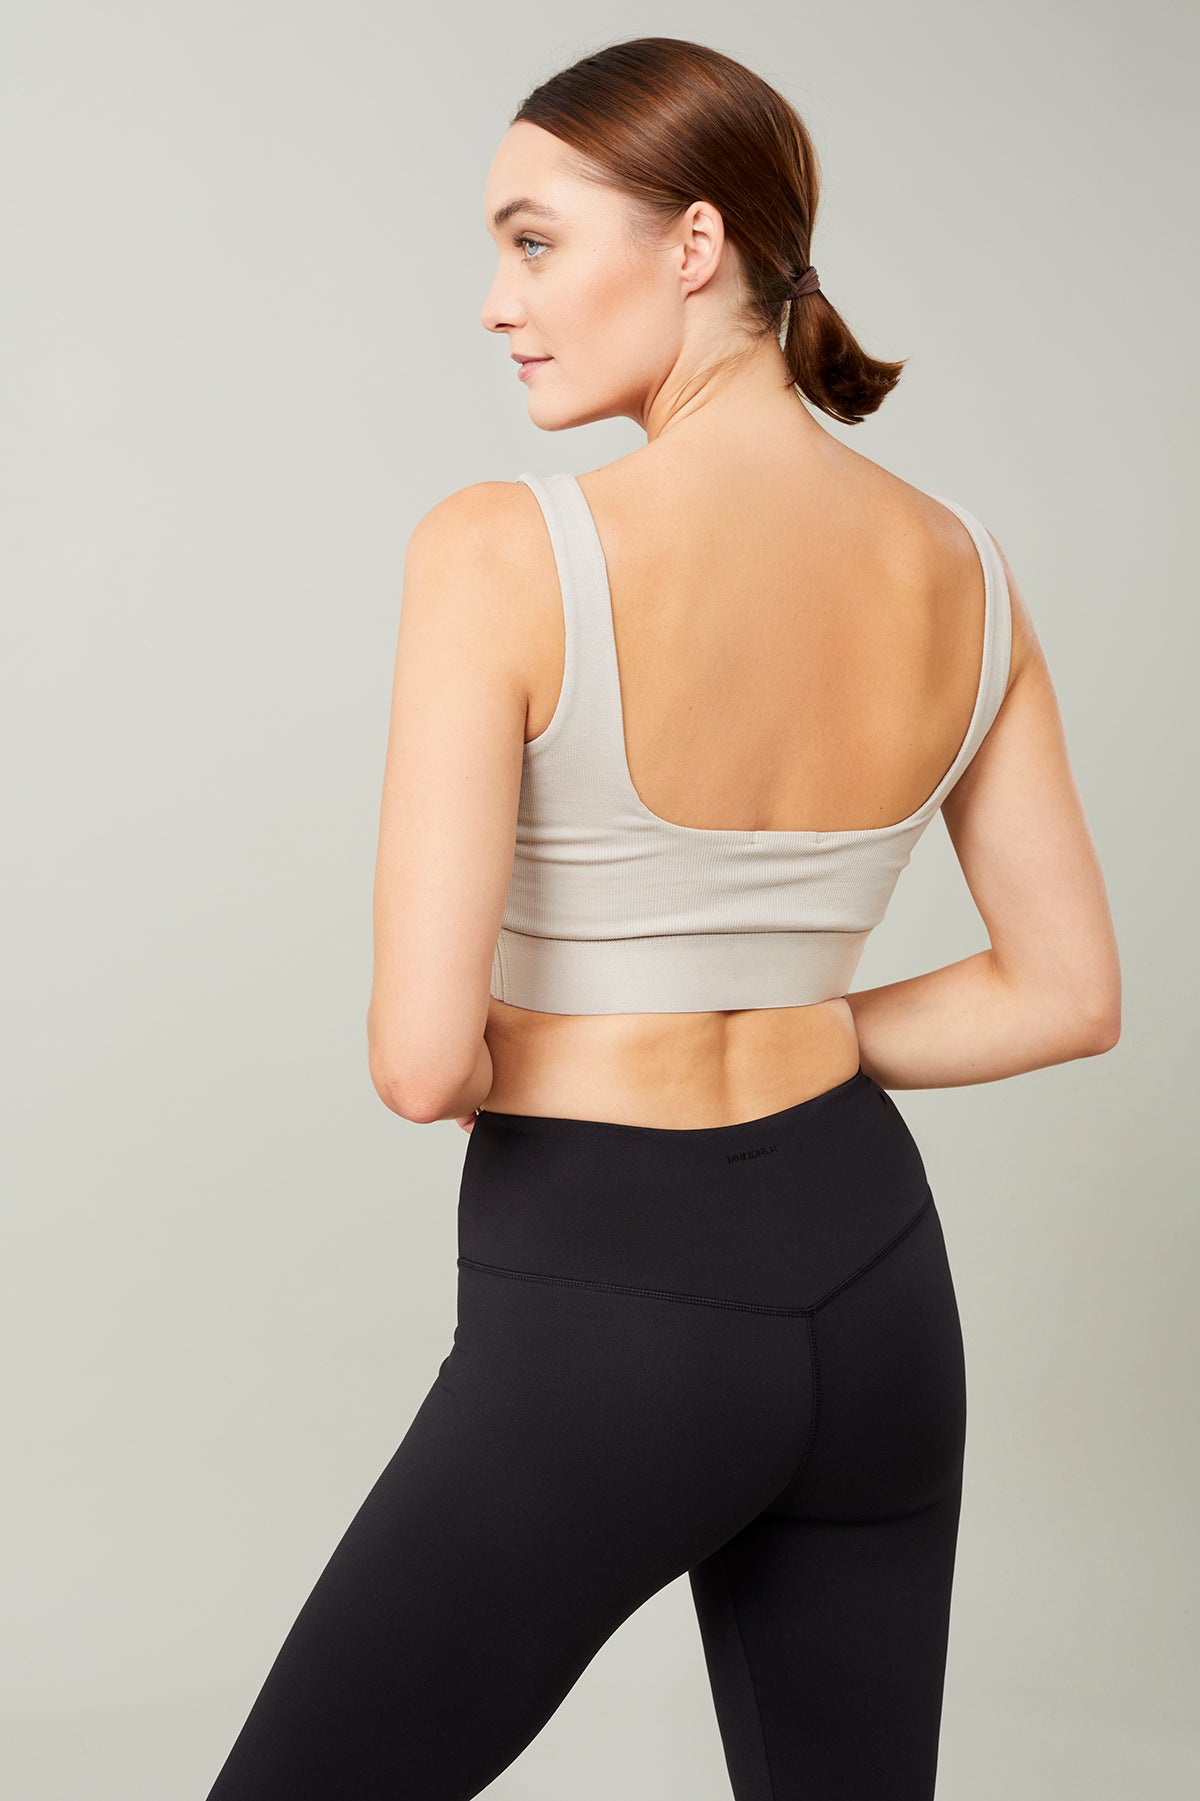 Yoga Bras - Perfect fit, fair & sustainable